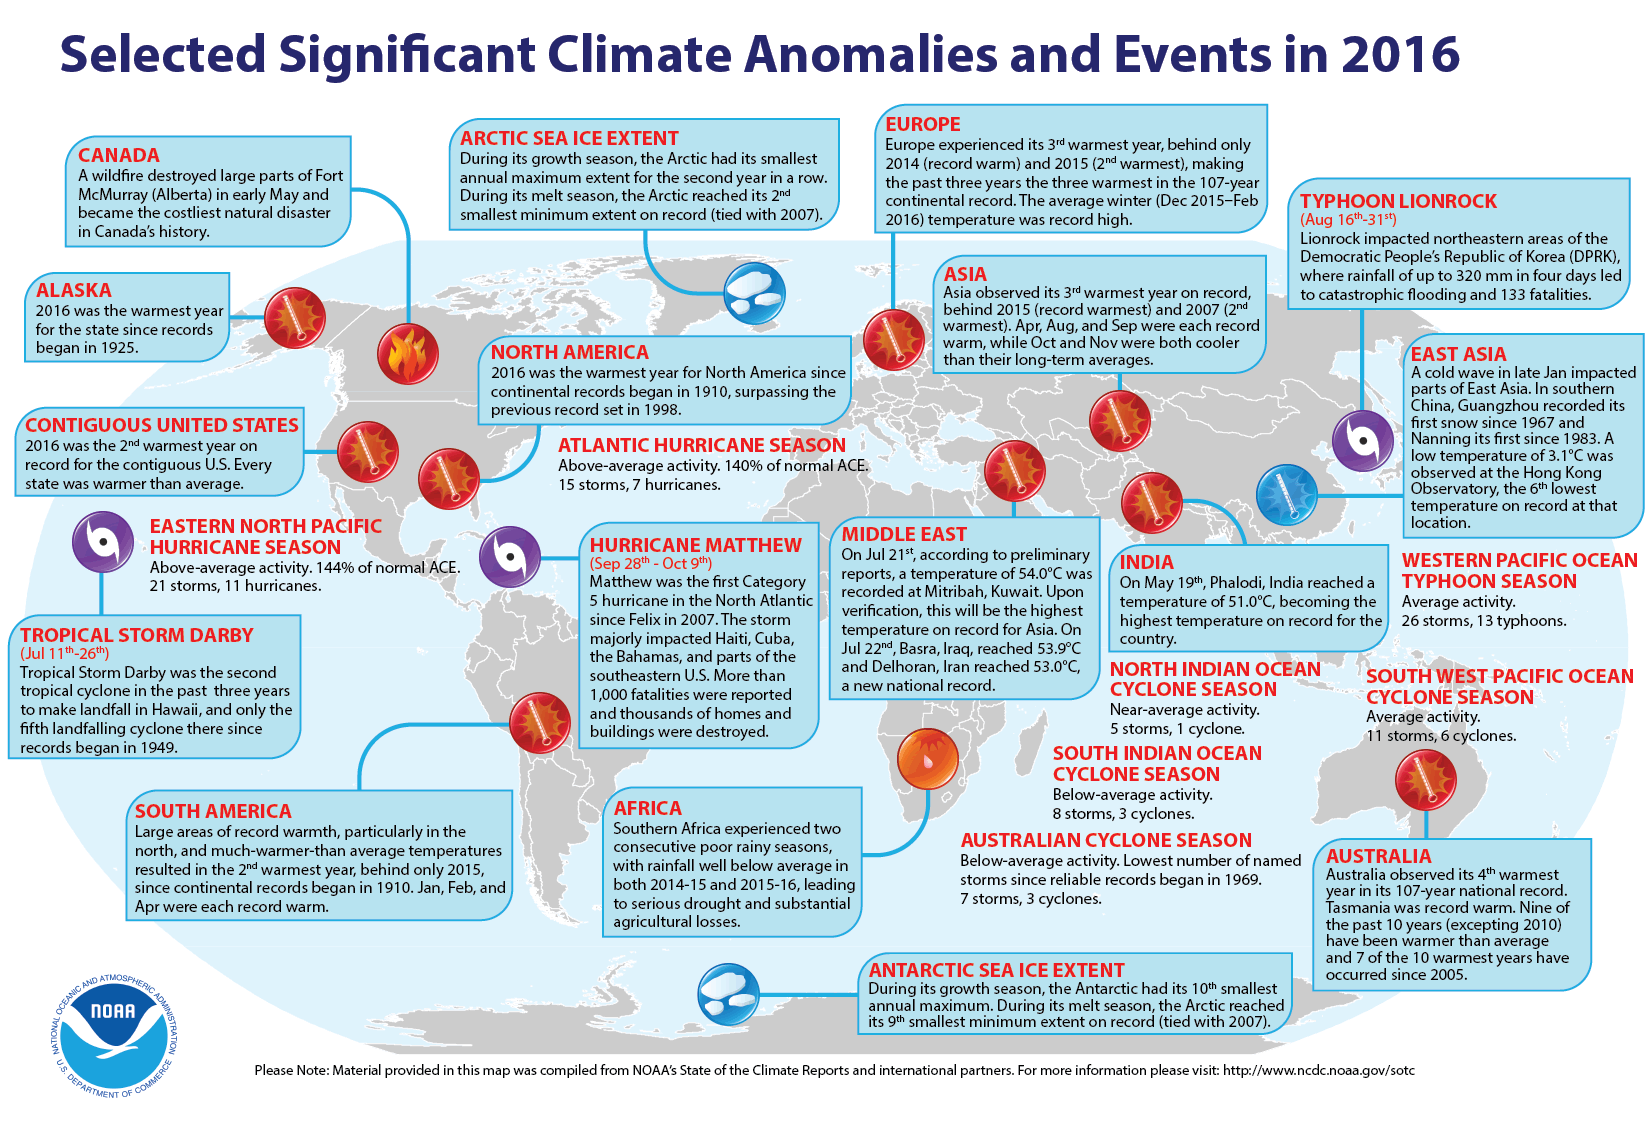 Significant Climate Anomalies and Events in 2016